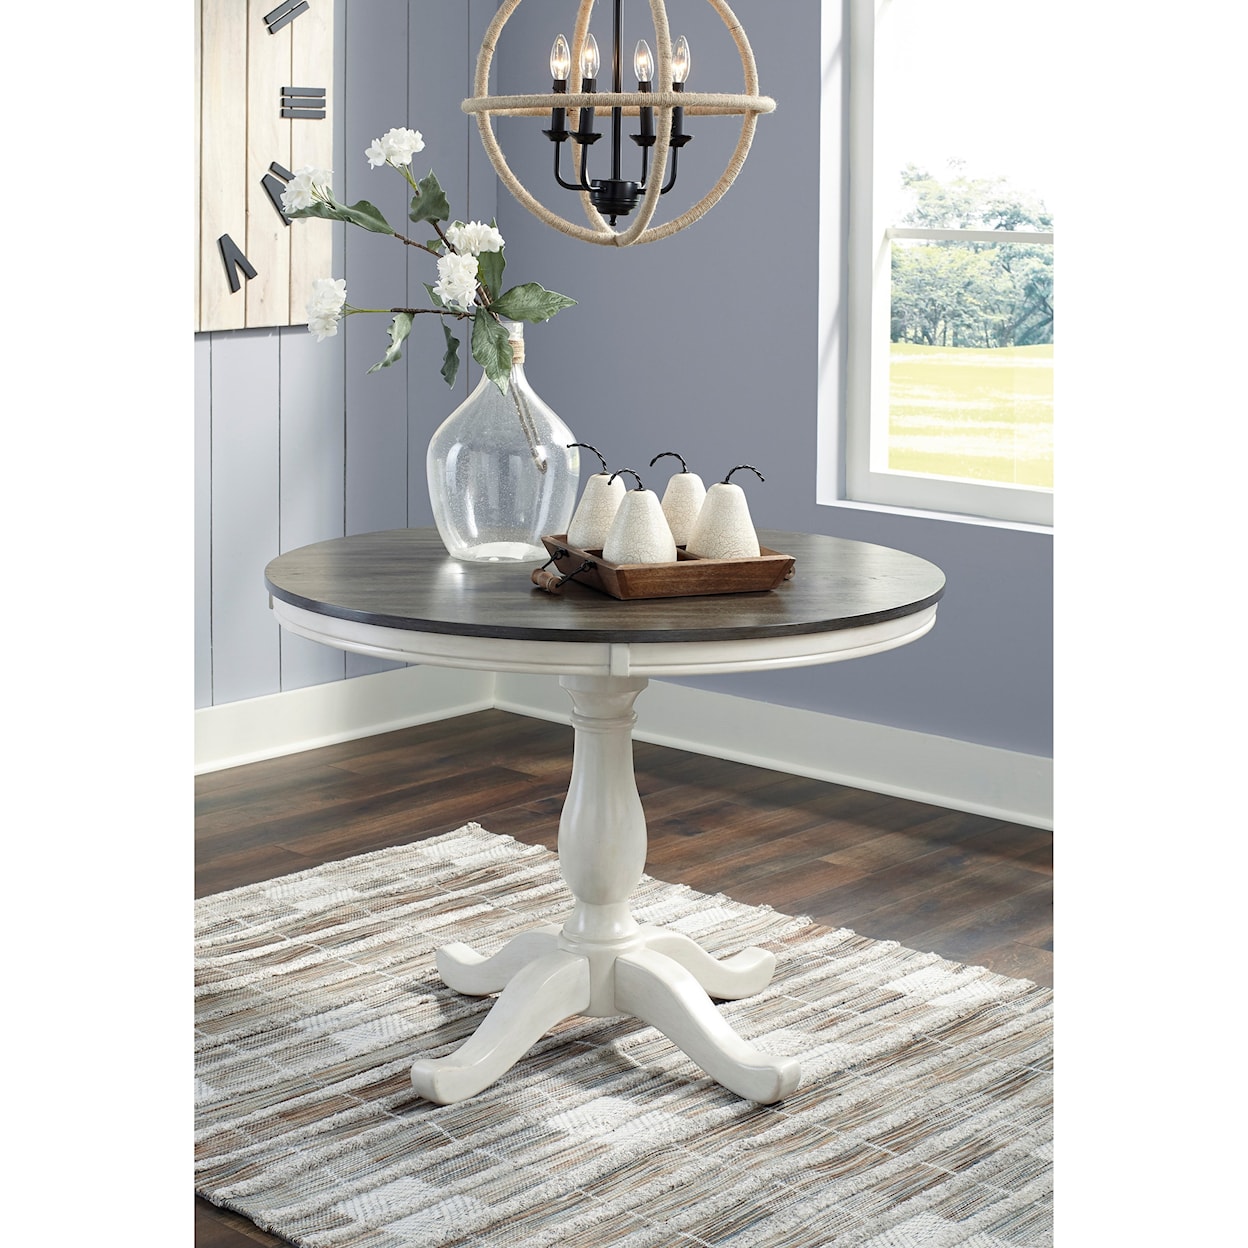 Signature Design by Ashley Nelling 3pc Dining Room Group